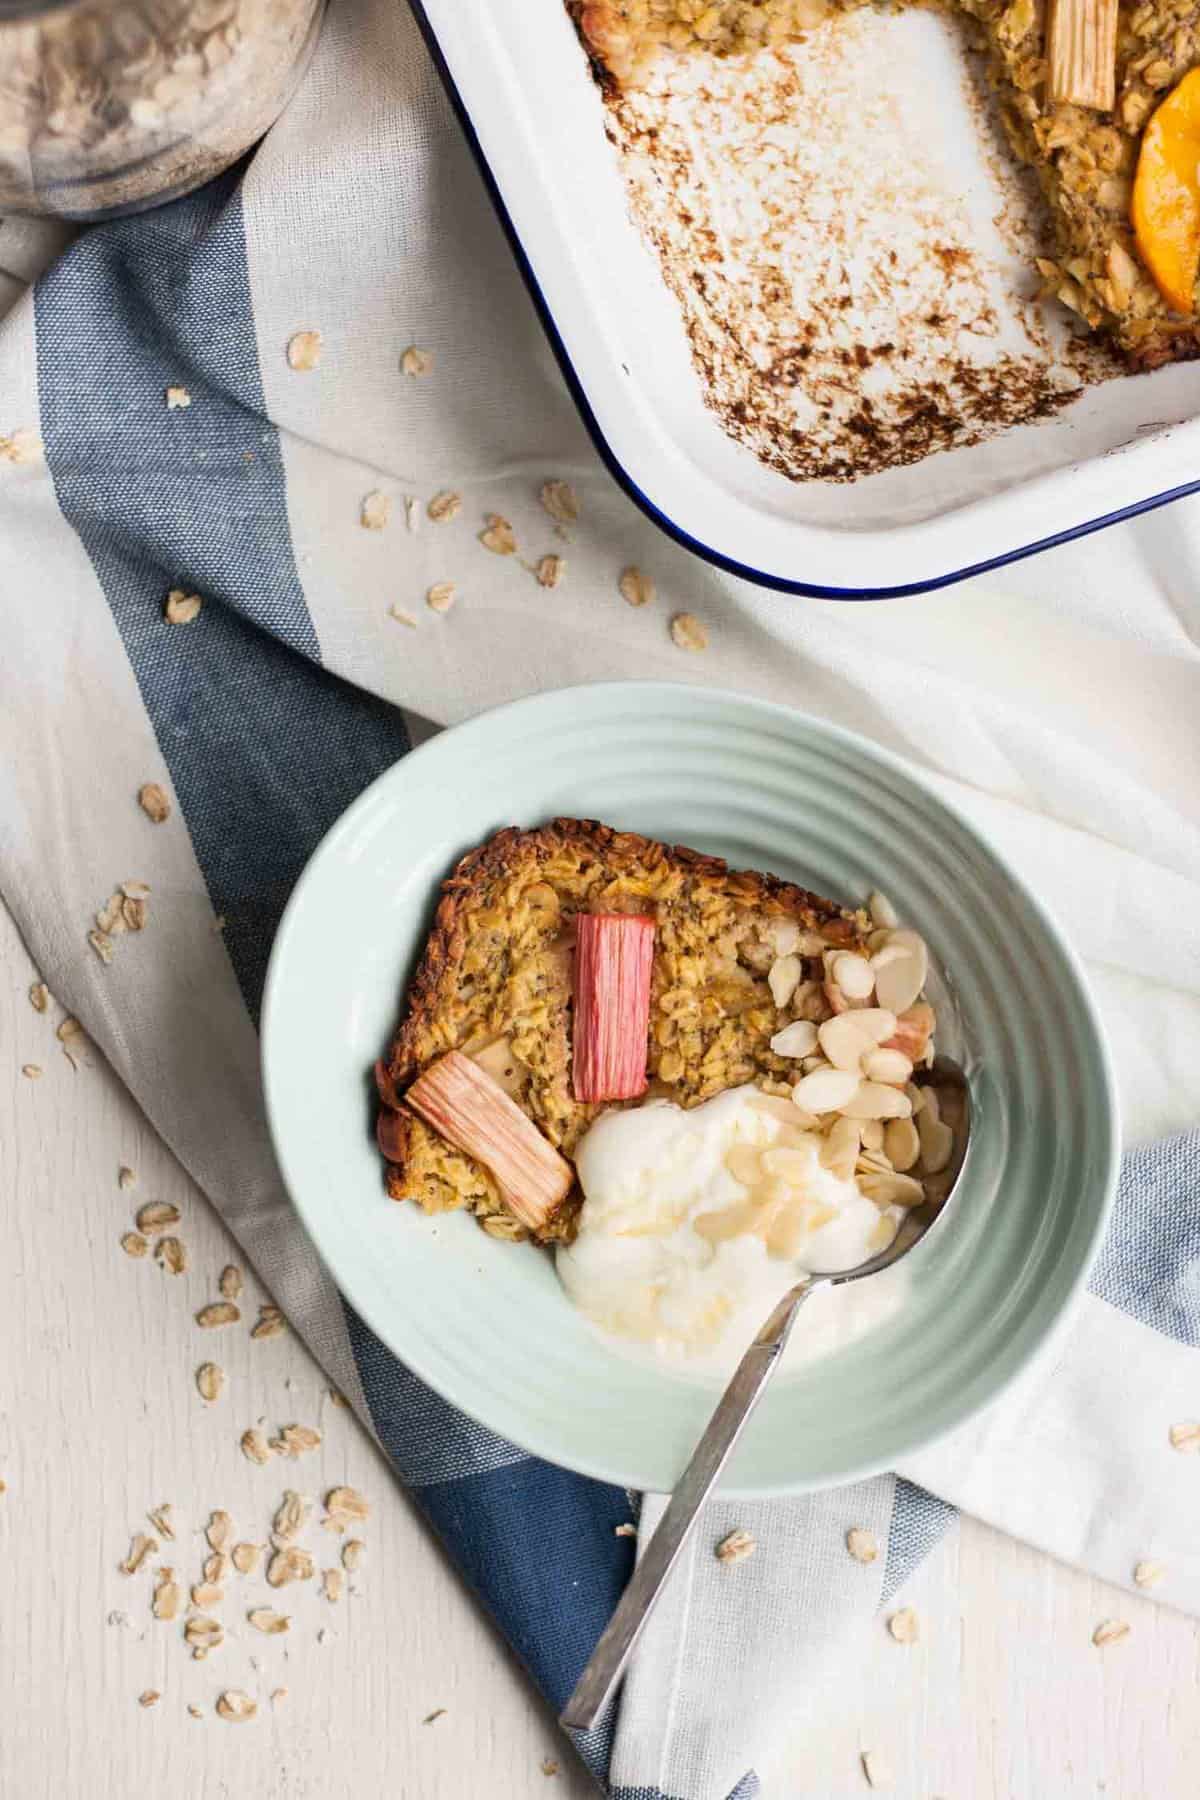 Rhubarb and Mango Baked Oatmeal - this naturally sweetened vegan breakfast dish is bright and fruity and will keep you full until lunchtime! | eatloveeats.com